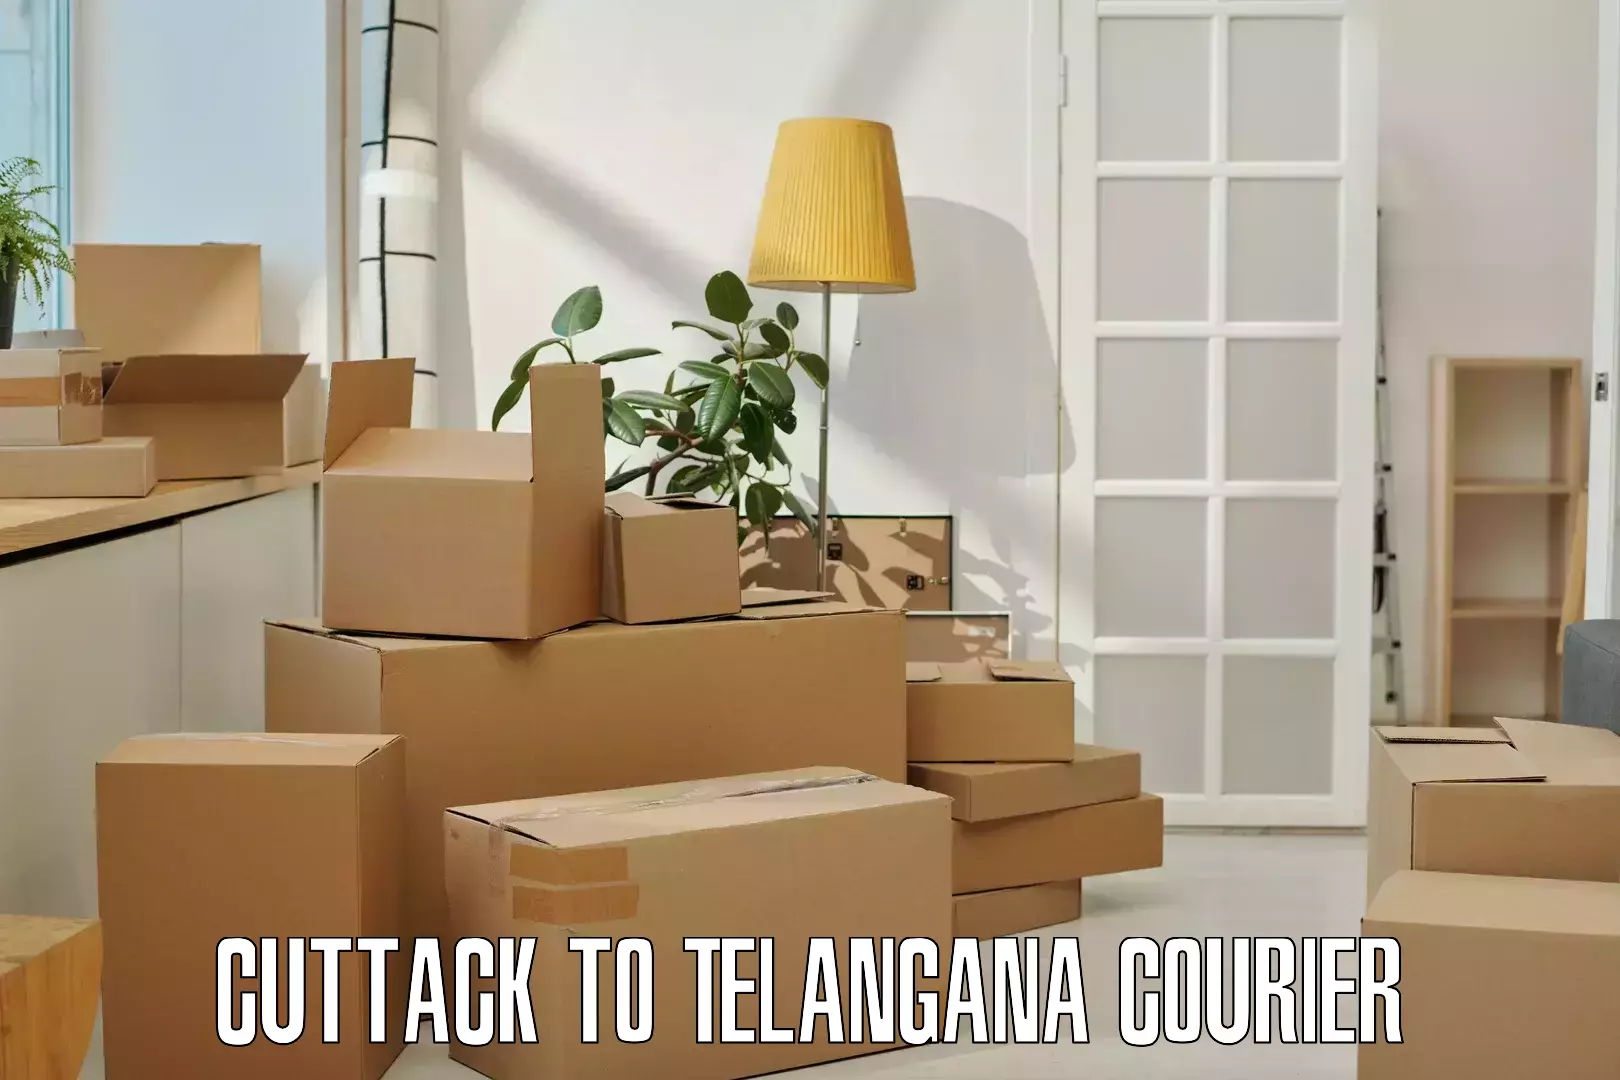 Reliable delivery network Cuttack to Sikanderguda